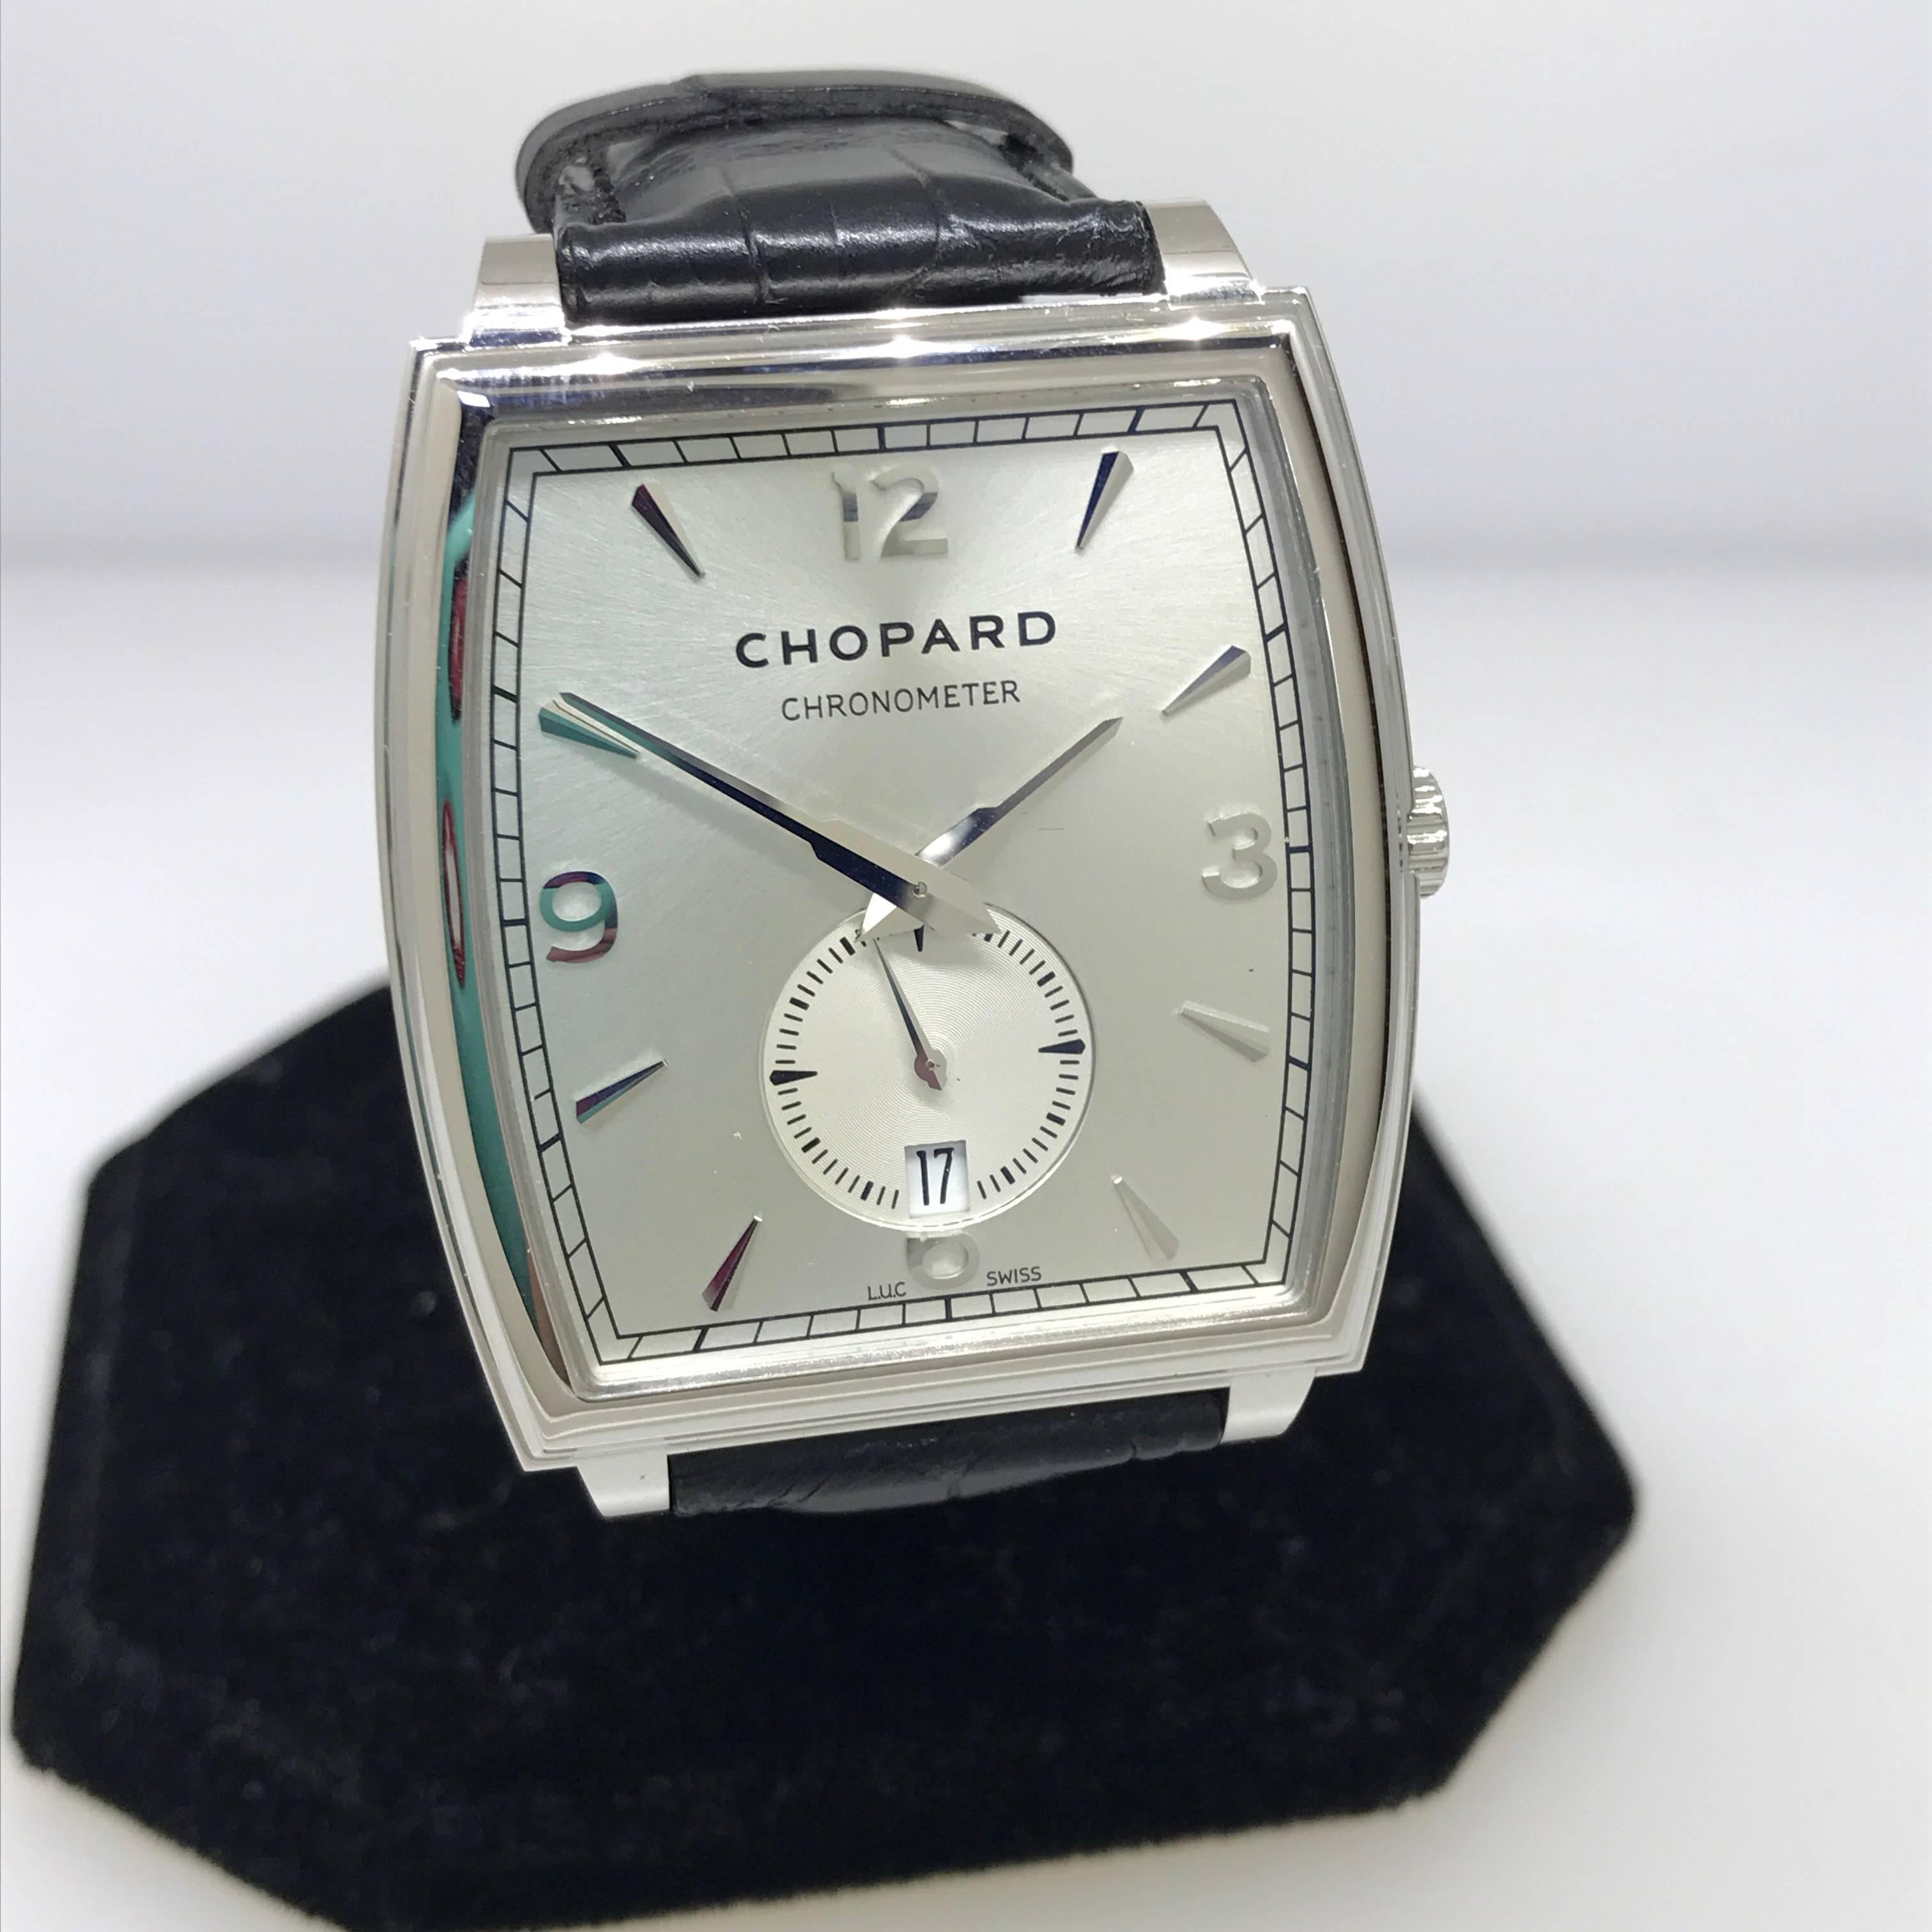 Chopard L.U.C. XP Tonneau Men's watch

Model Number: 16/2294-1001

100% Authentic

New 

Comes with original Chopard certificate of authenticity and warranty, and instruction manual

18 Karat White Gold Case

Silver Dial

Swiss made automatic